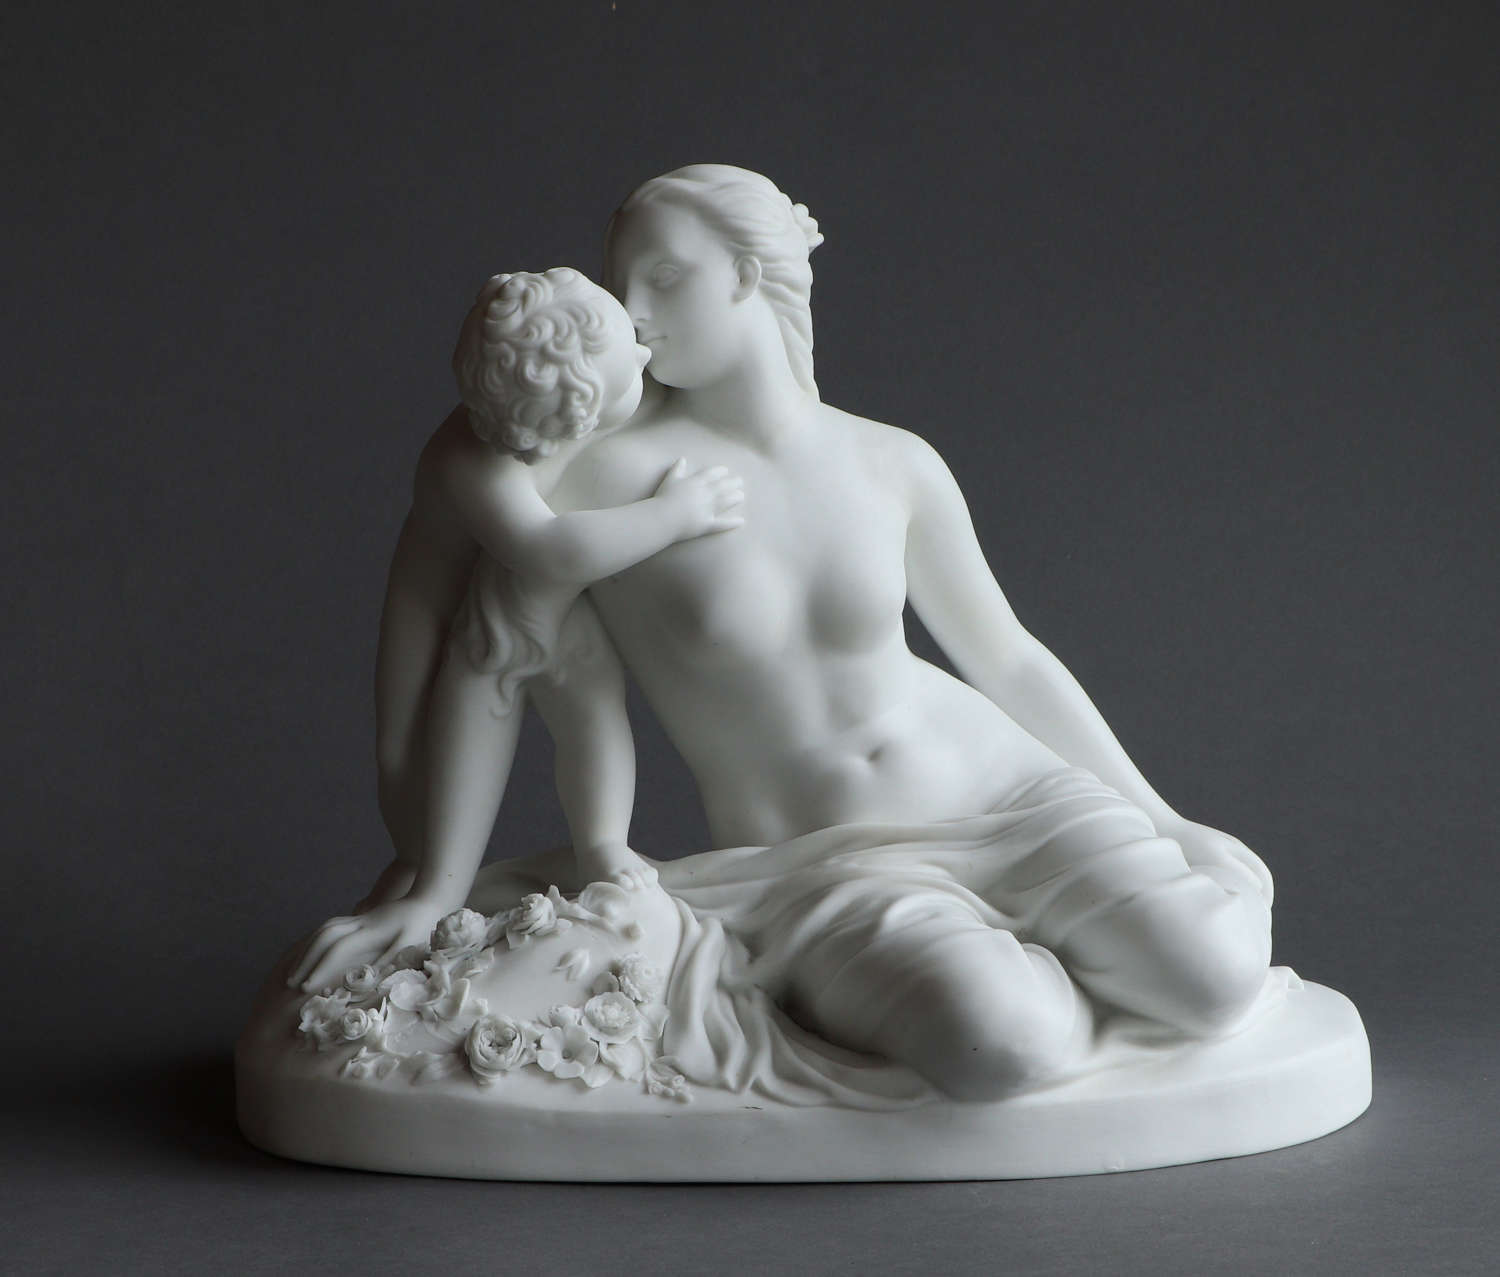 A rare Minton Parian group  “Child’s Play” by John Bell